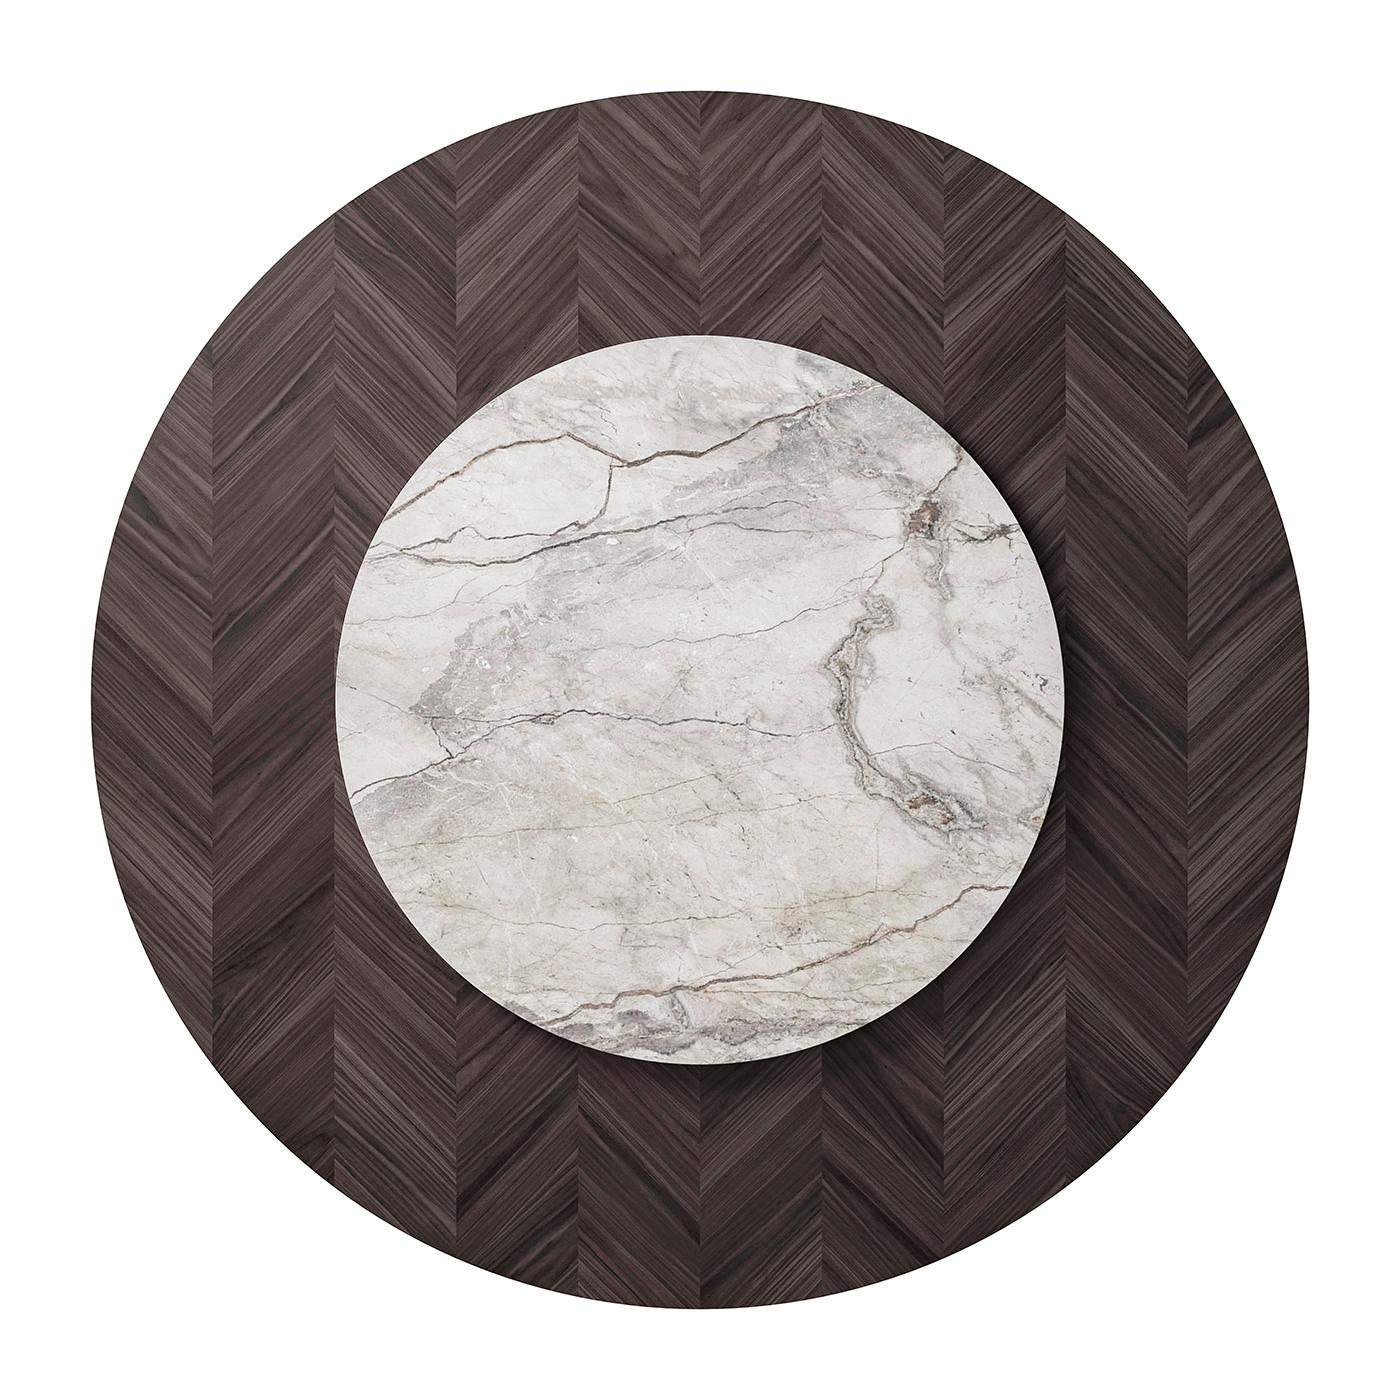 From a wide collection of tables by Cipriani, the round inlaid dining table features a chic top in Hungarian herringbone veneer, transmitting a sense of timeless style and luxury. Standing on a round metal plate that echoes the table's surface, the